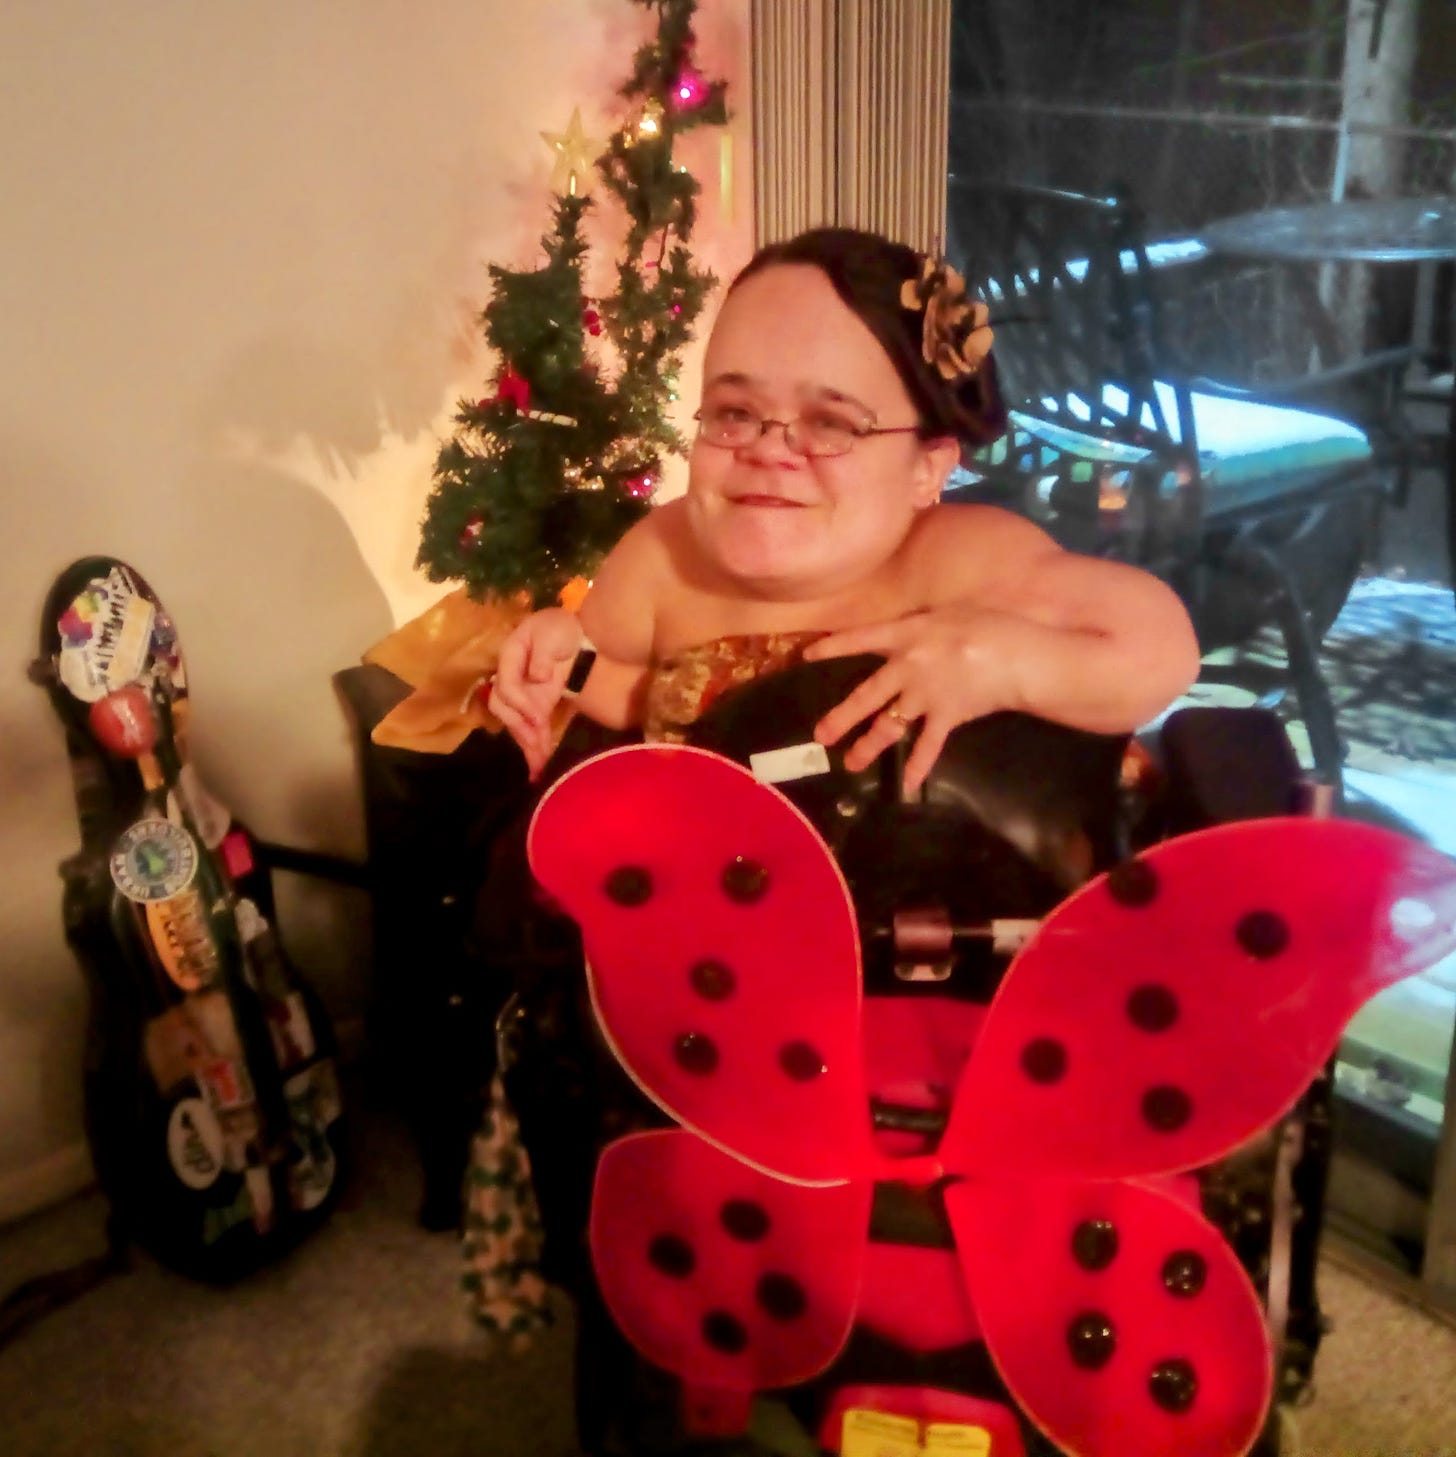 Gaelynn is seated backwards in her electric wheelchair to show off the red and black ladybug wings that are attached to the handlebars of her chair. She is smiling. She is wearing a yellow and orange dress and her brown hair is pulled up with a yellow flower clip. Behind her is a small Christmas tree and a garland with colored Christmas lights. Her violin case is propped against the wall.